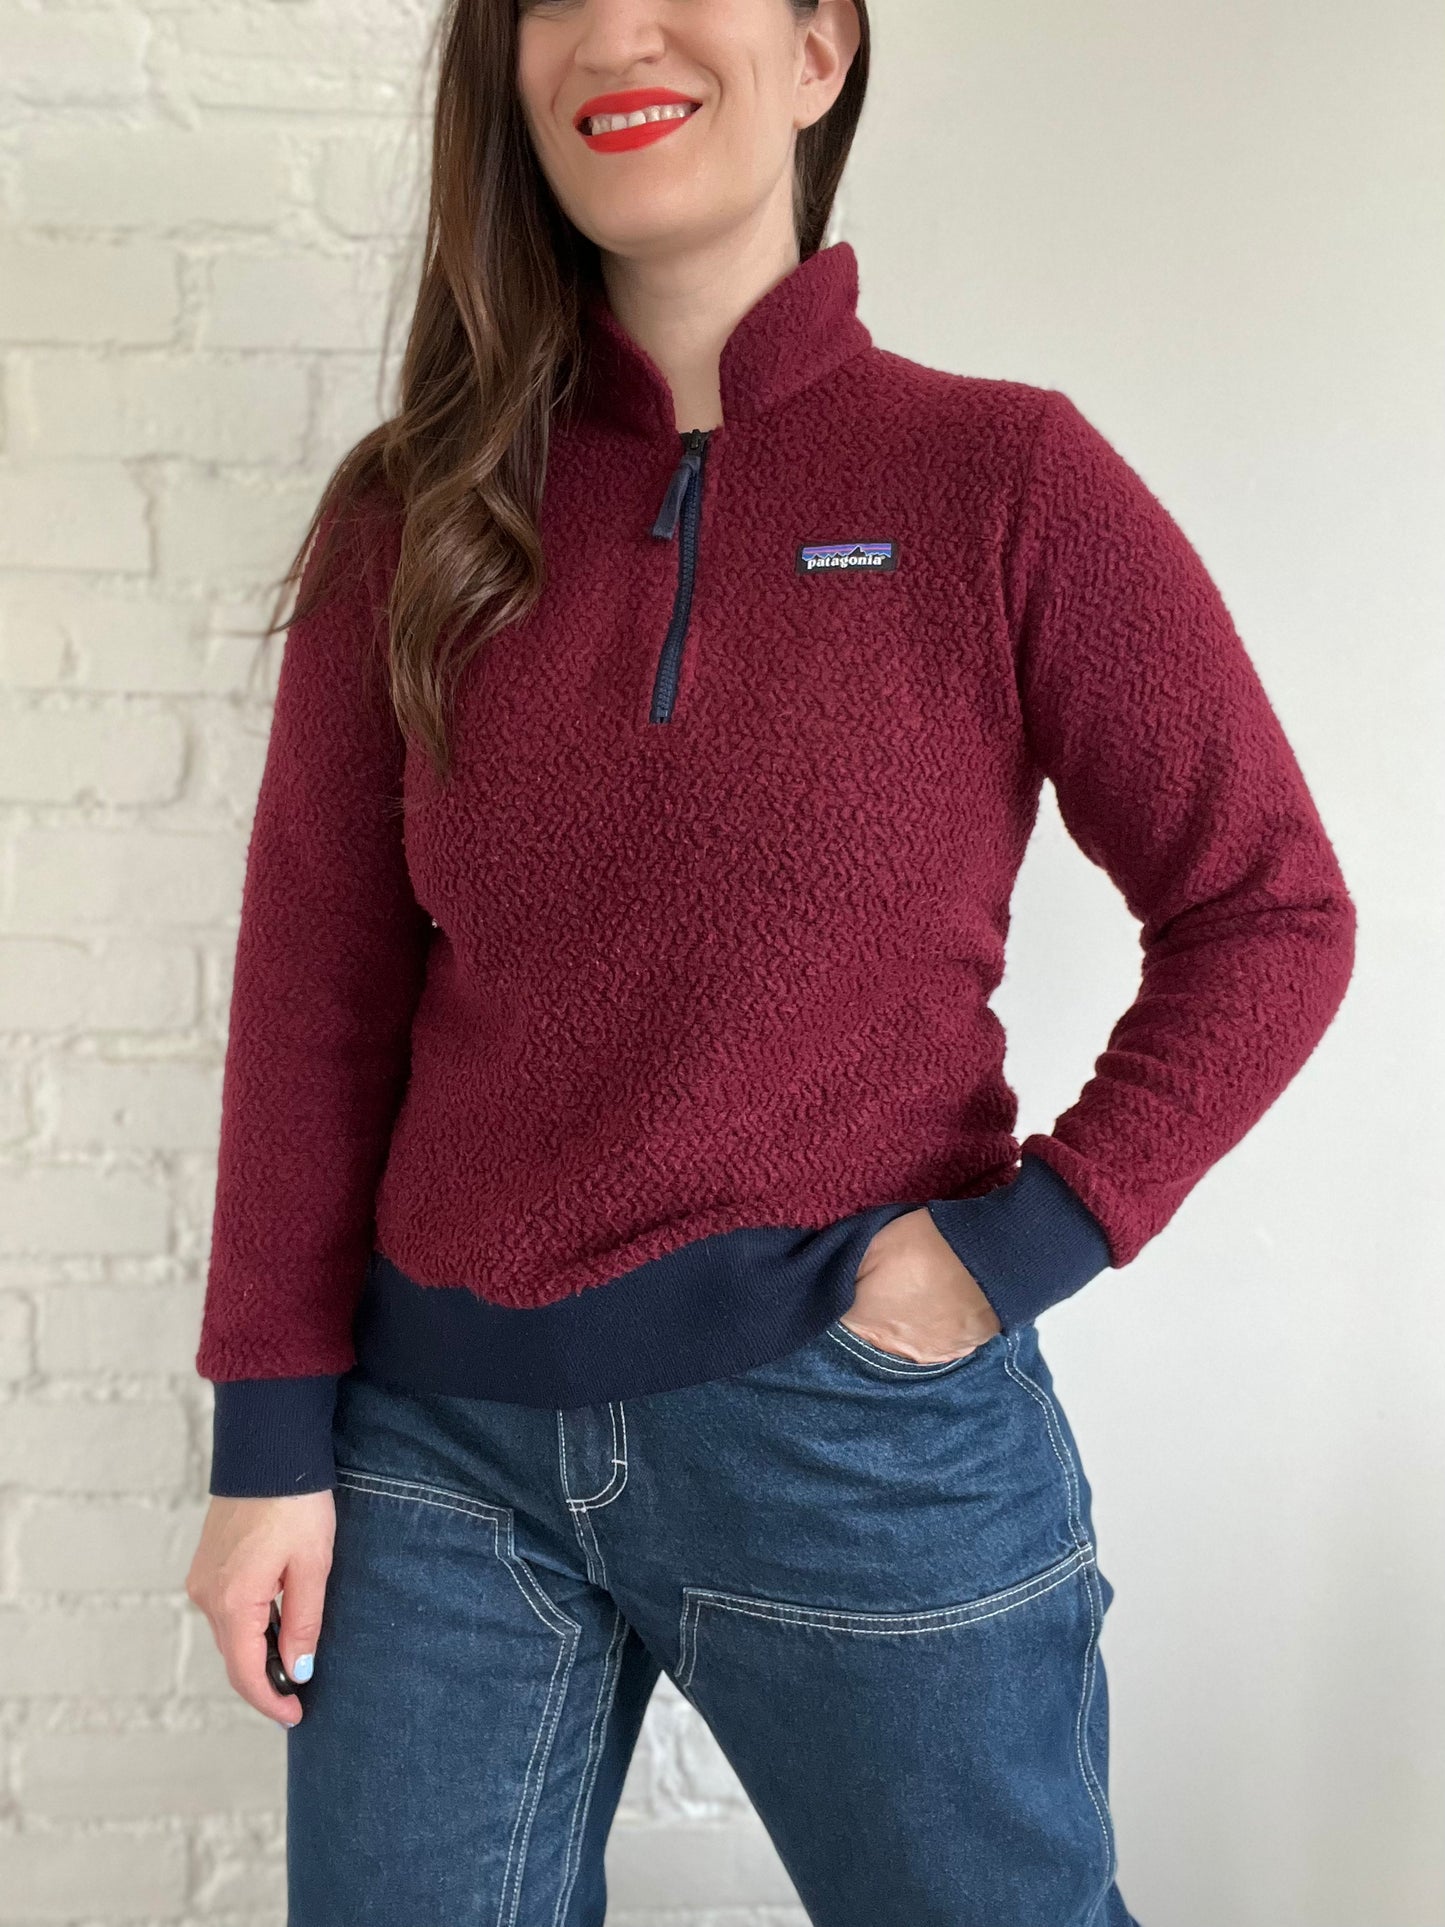 Patagonia Woolyester Fleece Pullover - M